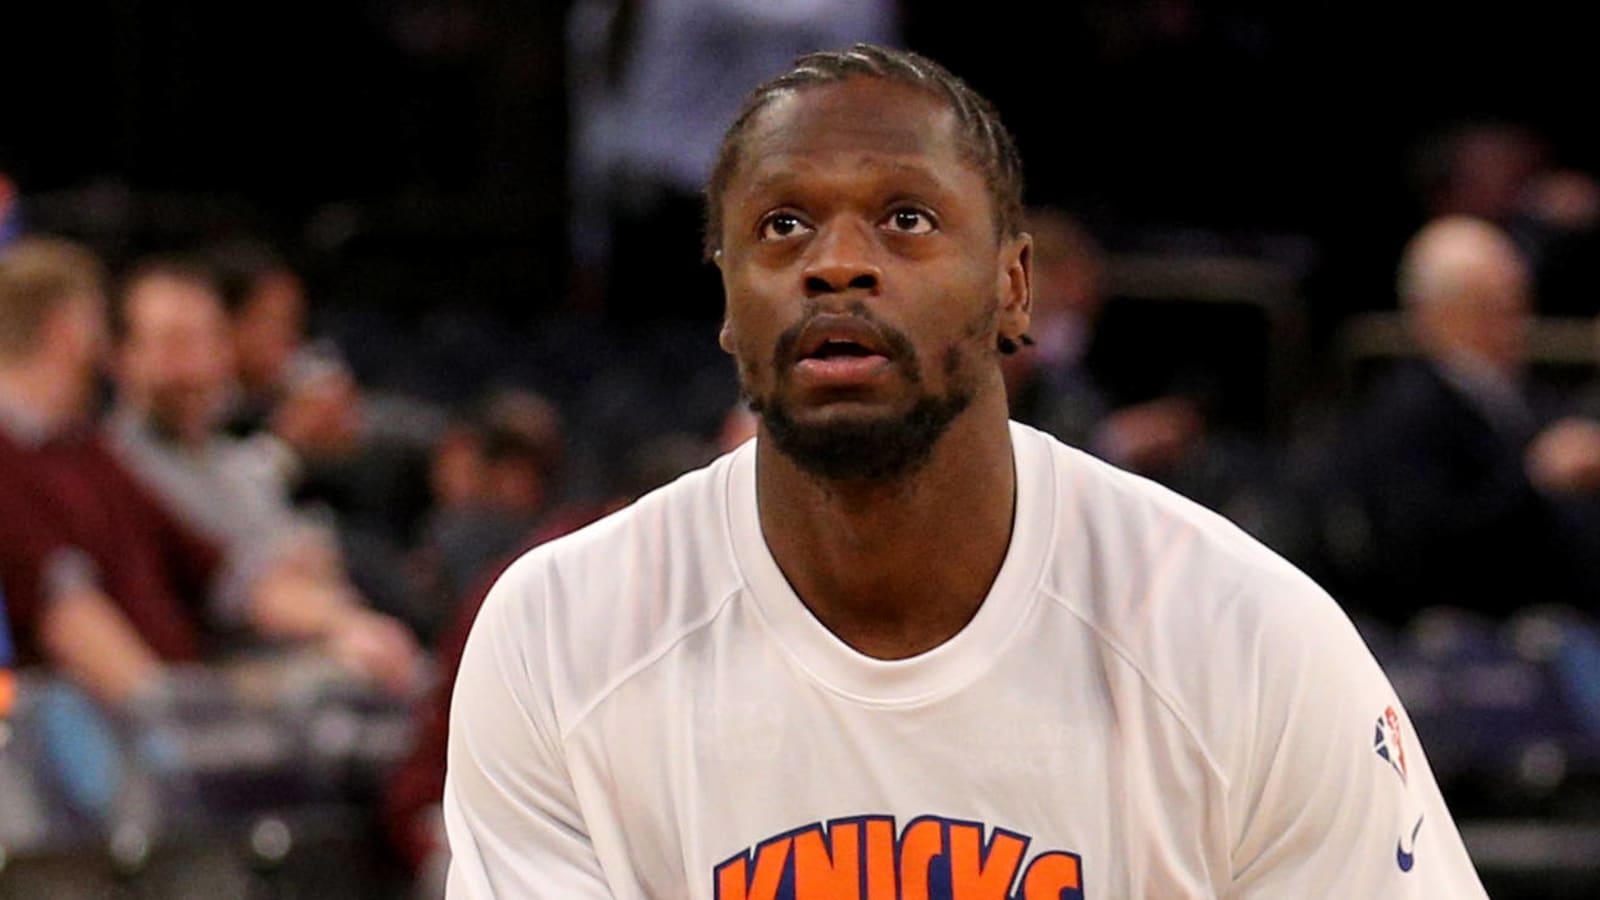 Knicks fan claims Julius Randle had him ejected for light trash talk